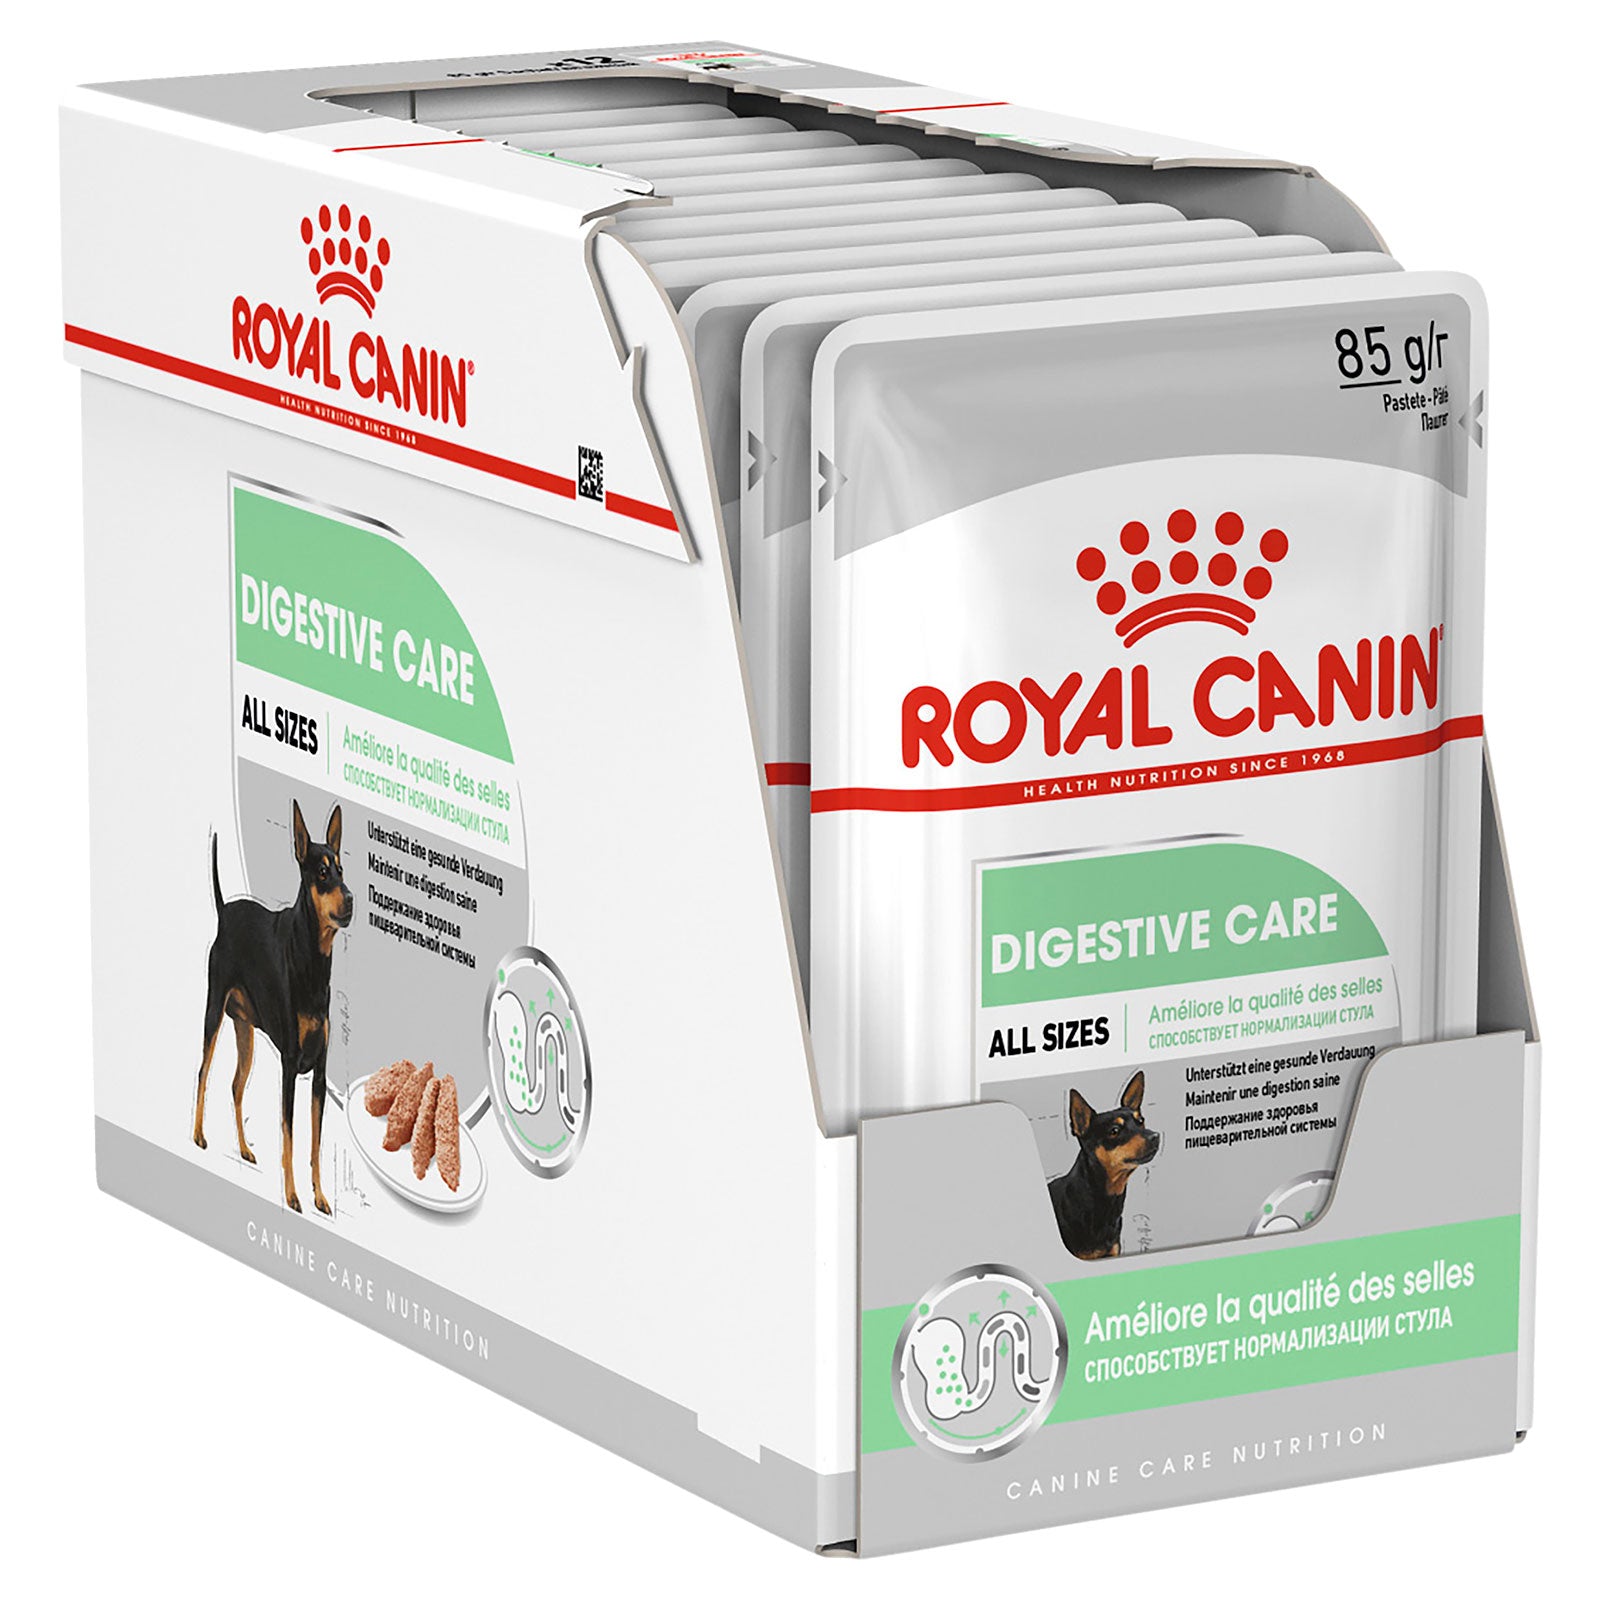 Royal Canin Dog Food Pouch Digestive Care